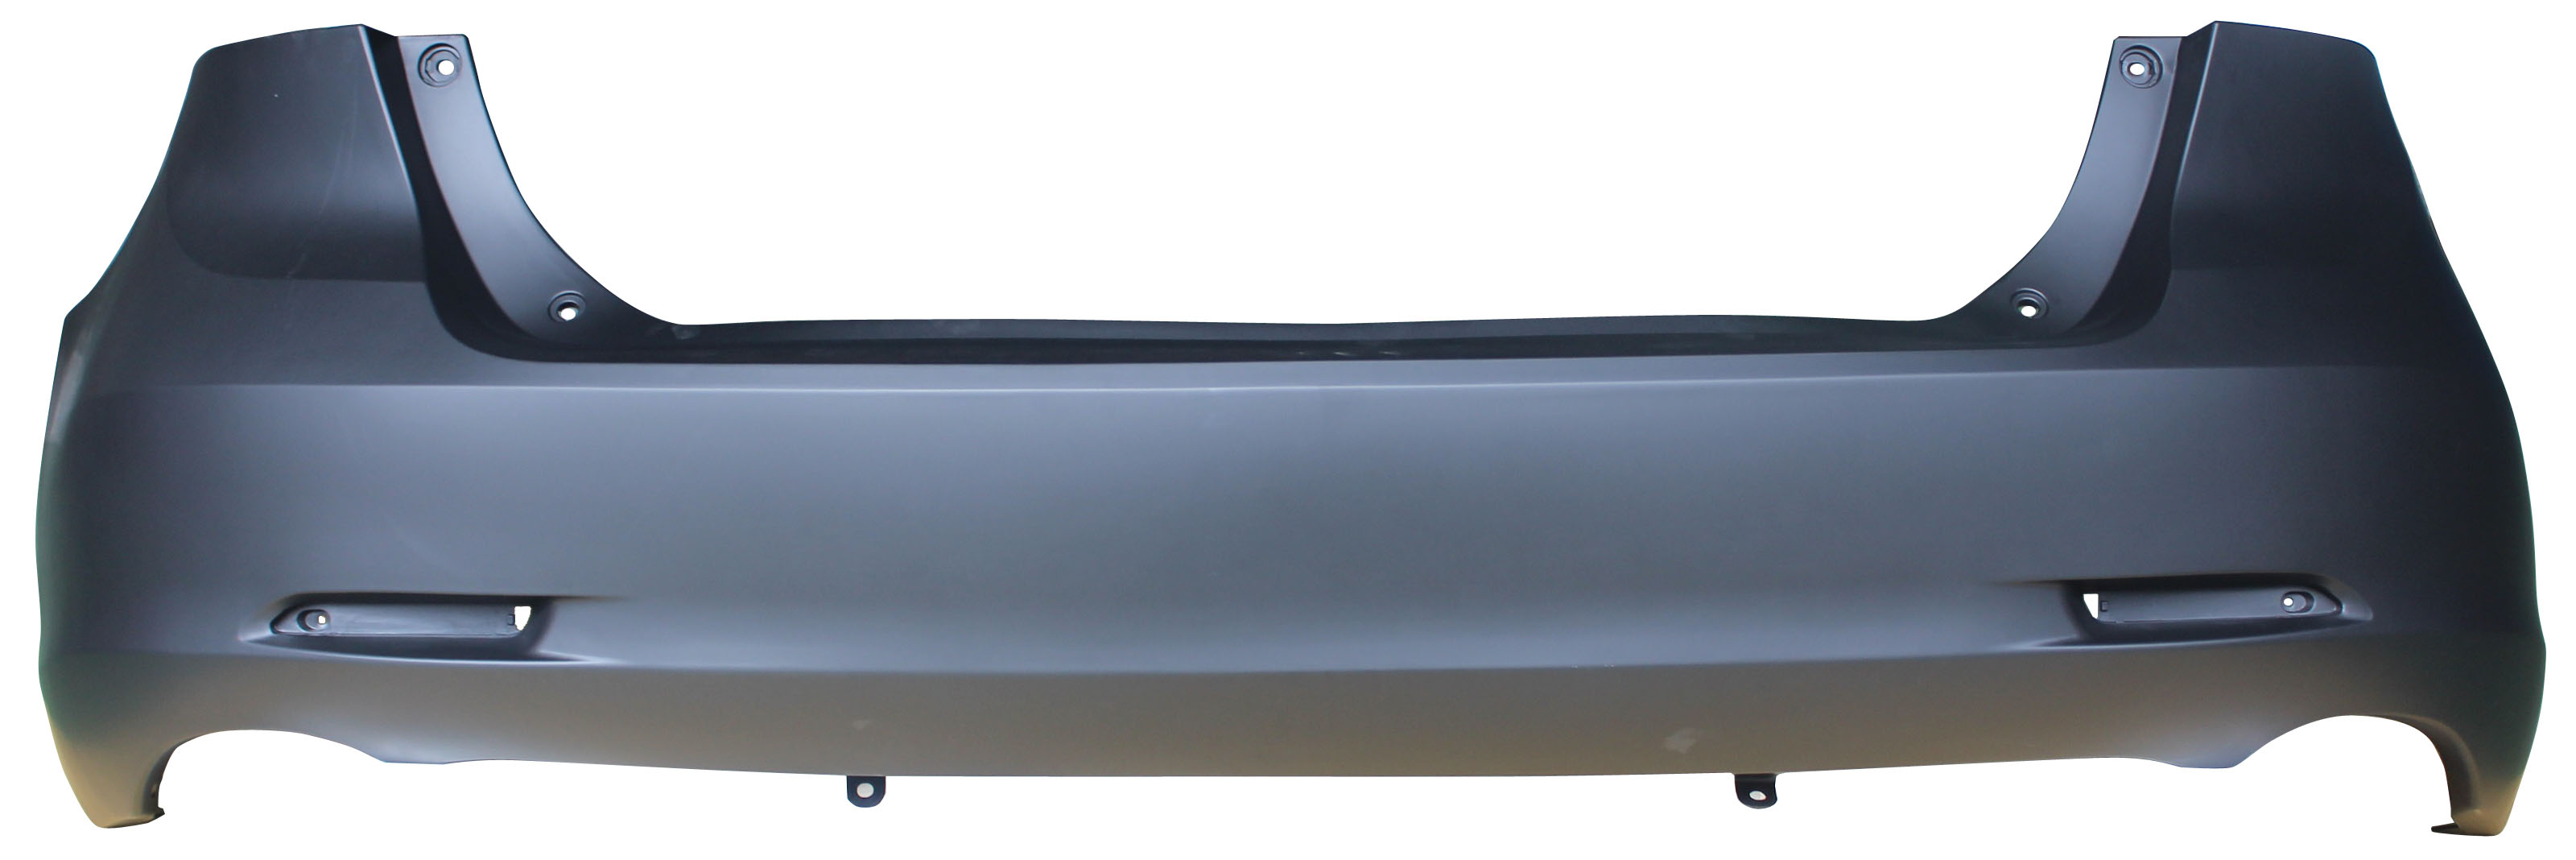 Aftermarket BUMPER COVERS for TOYOTA - VENZA, VENZA,09-16,Rear bumper cover